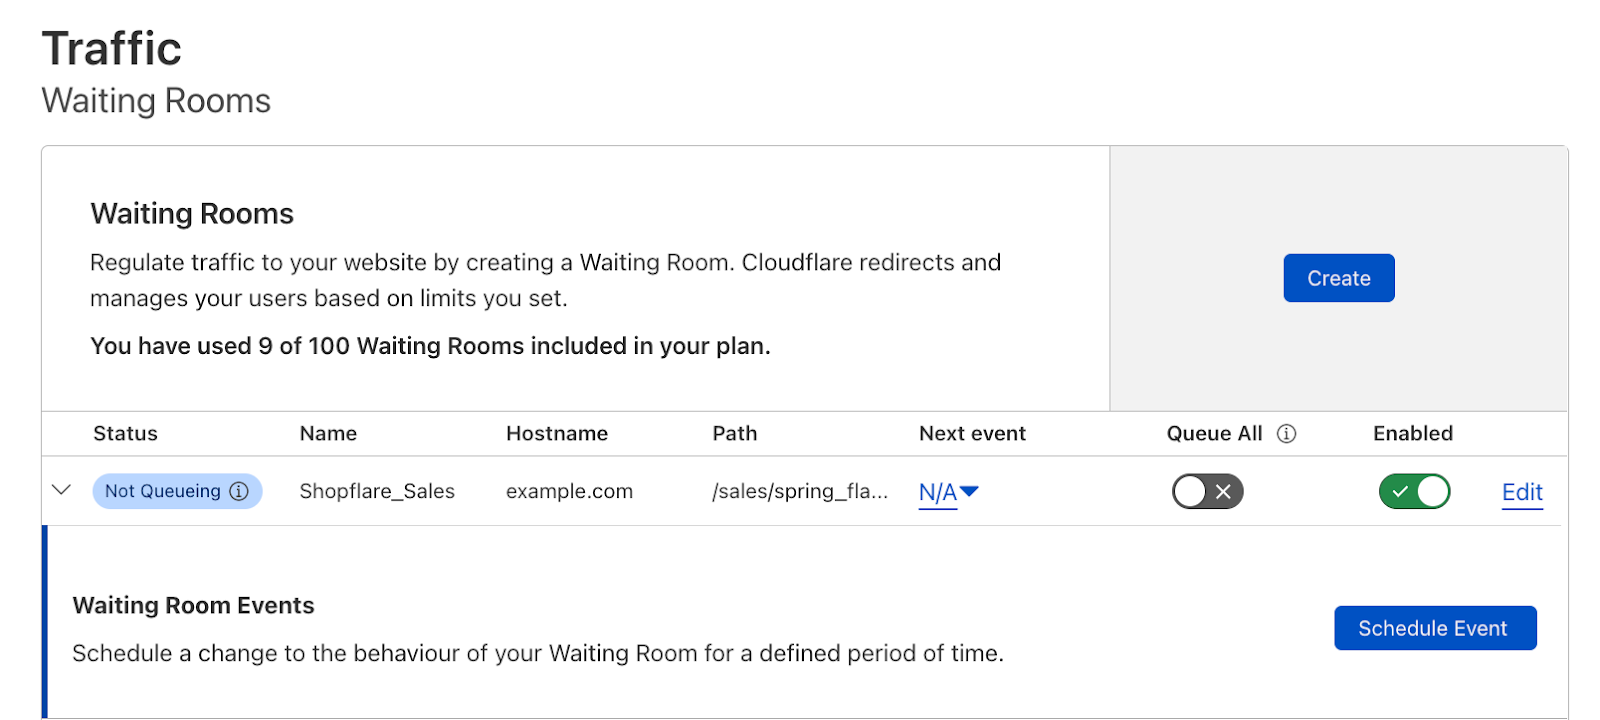 To create an event, expand the row for the desired waiting room from and click Schedule Event.